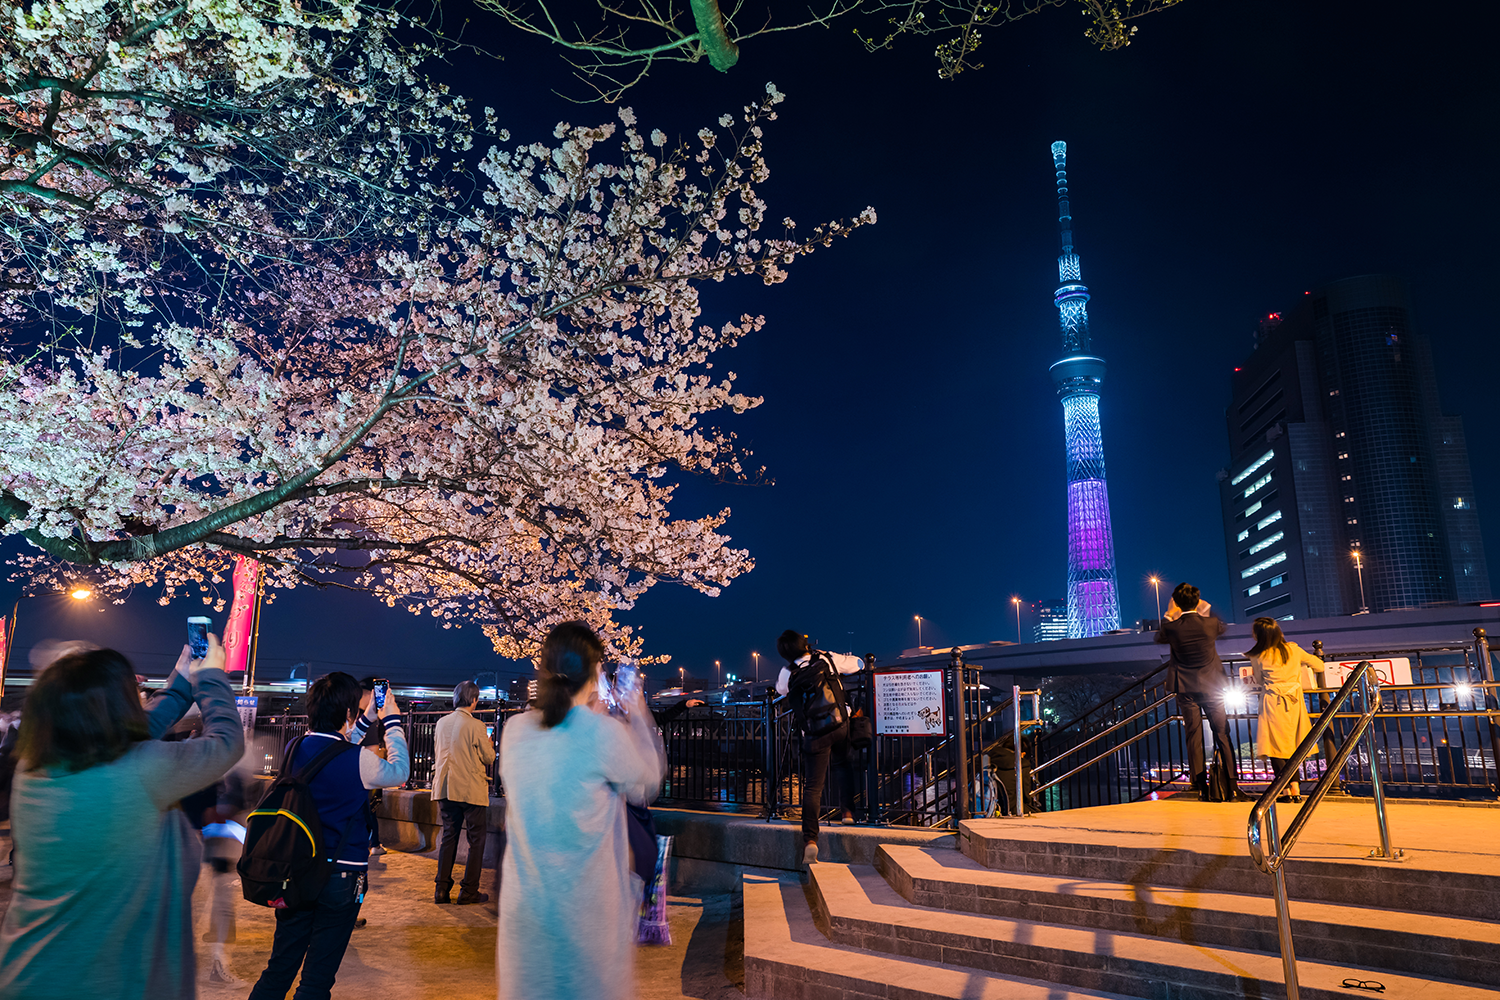 A group of tourists take photos in front of sakura trees and Tokyo Skytree.